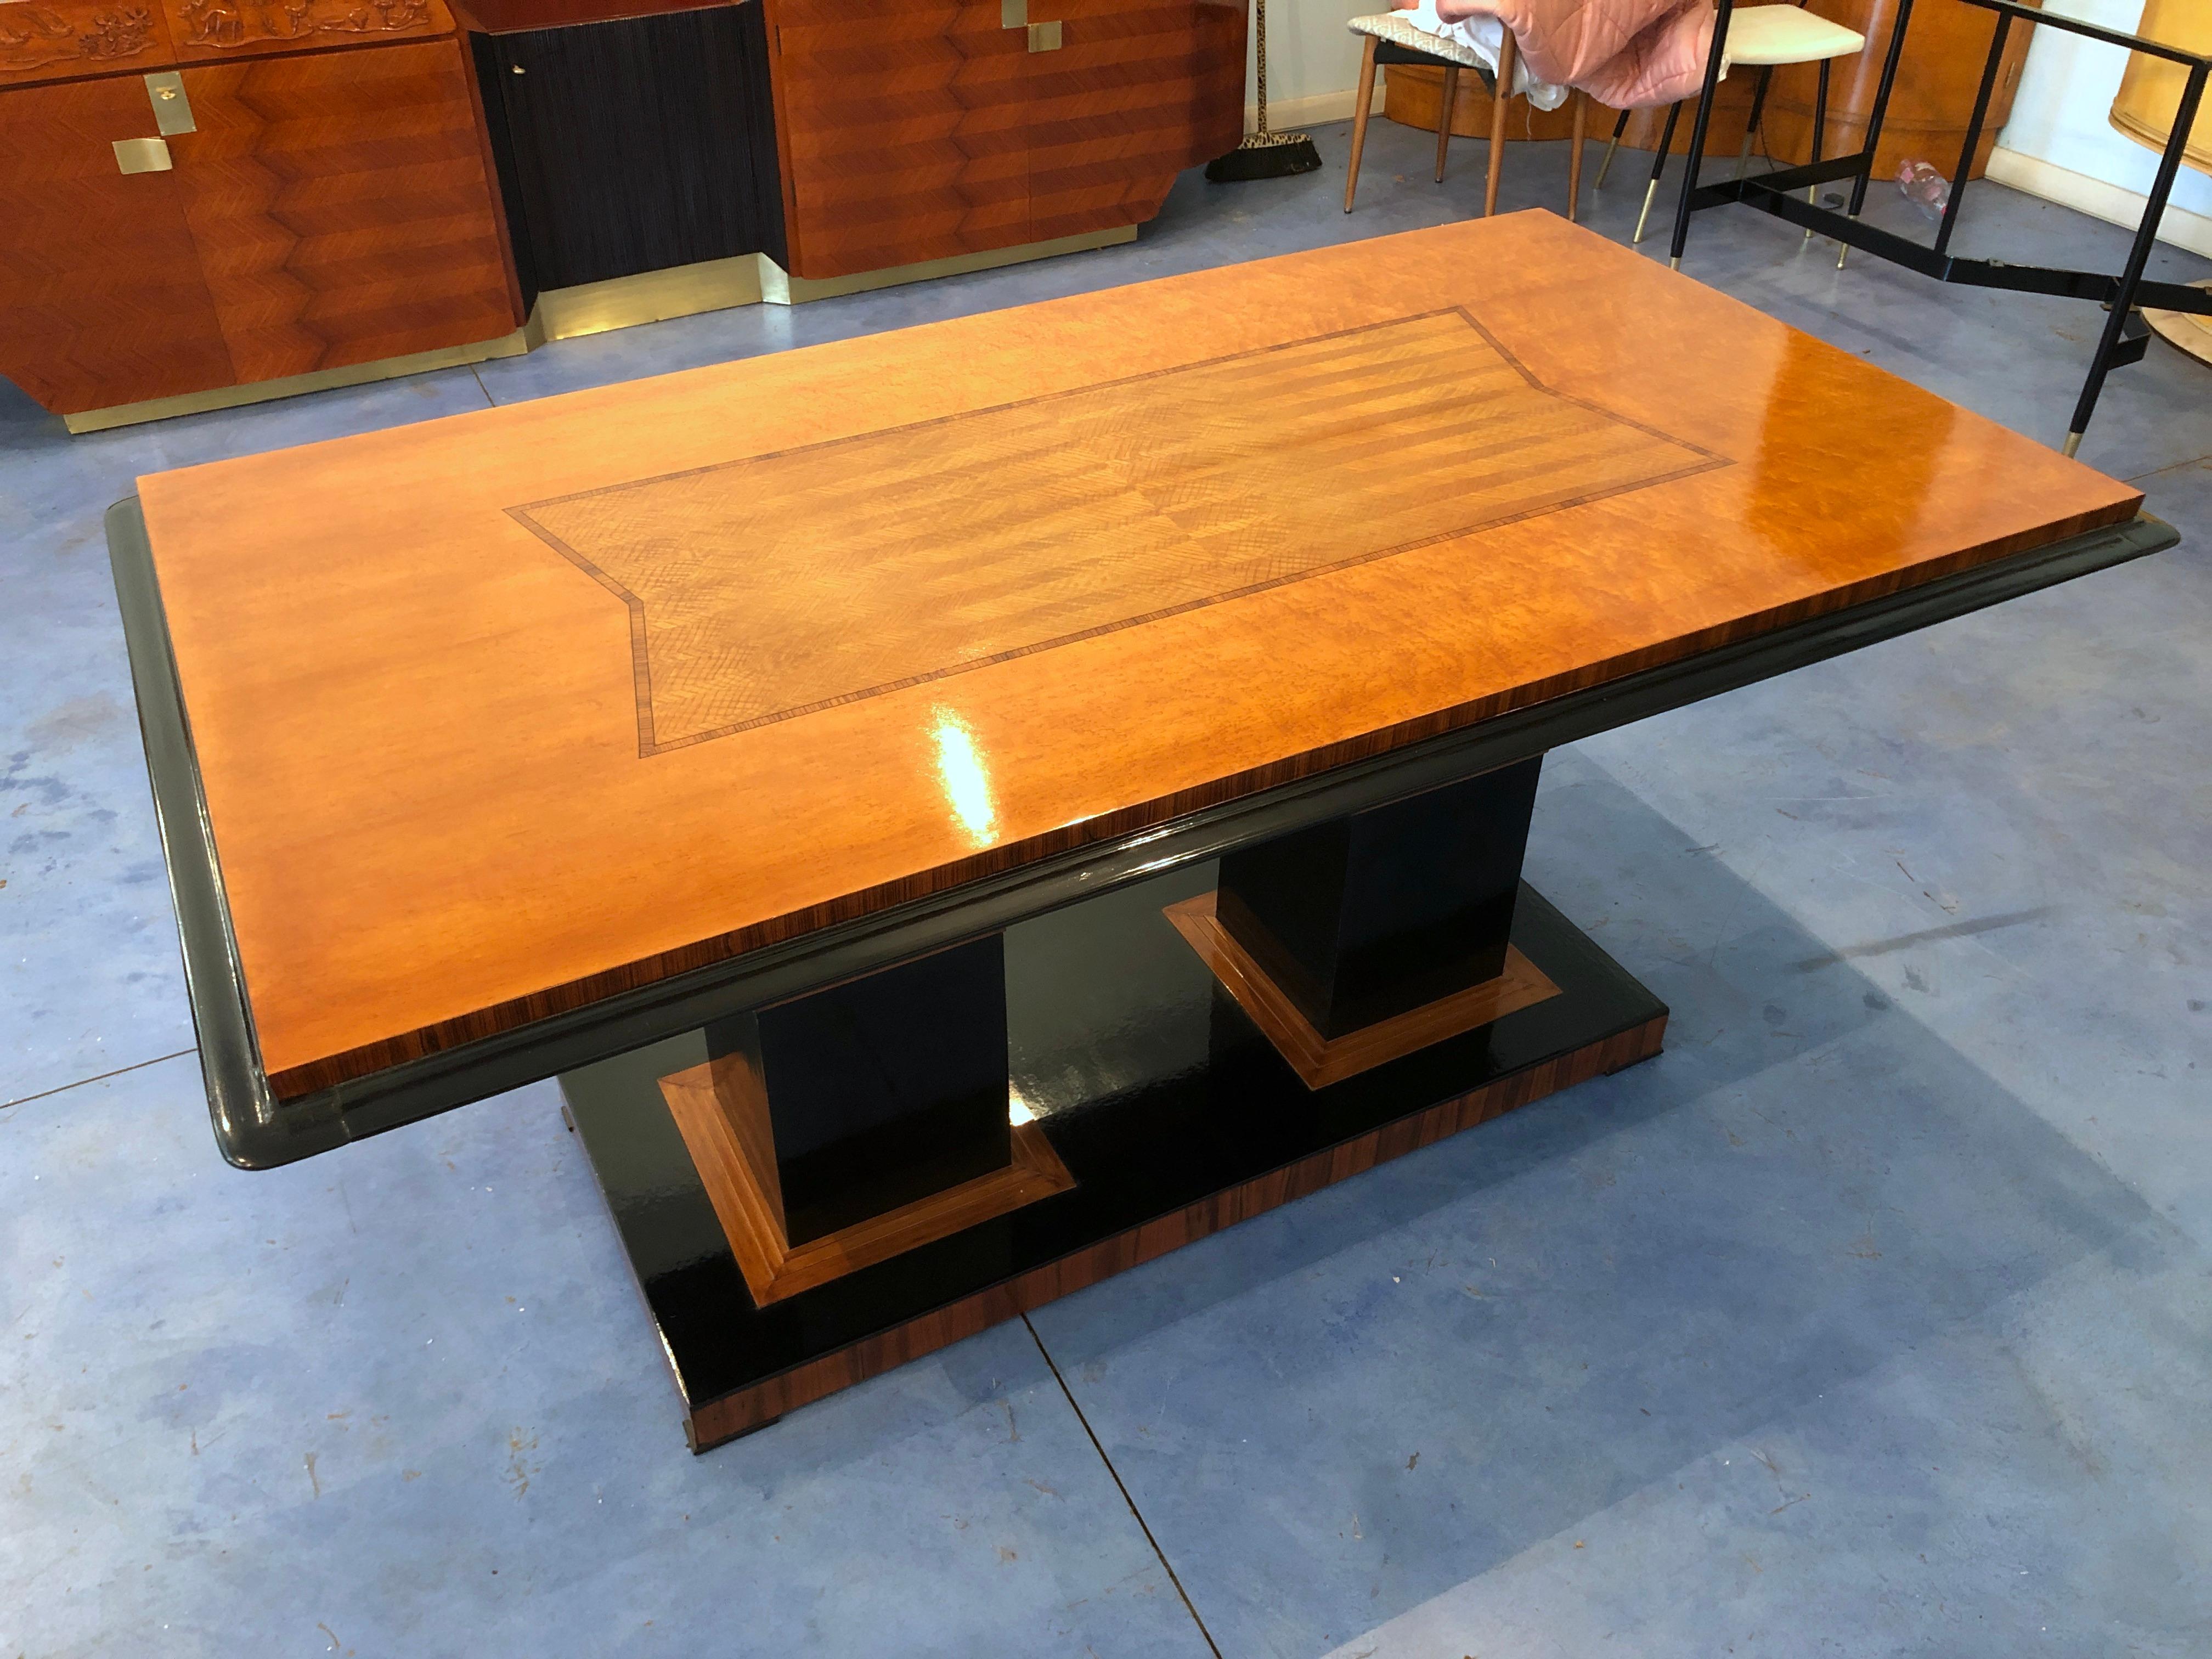 Lacquered Italian Art Deco Dining Table in Maple with Decoration, 1940s For Sale